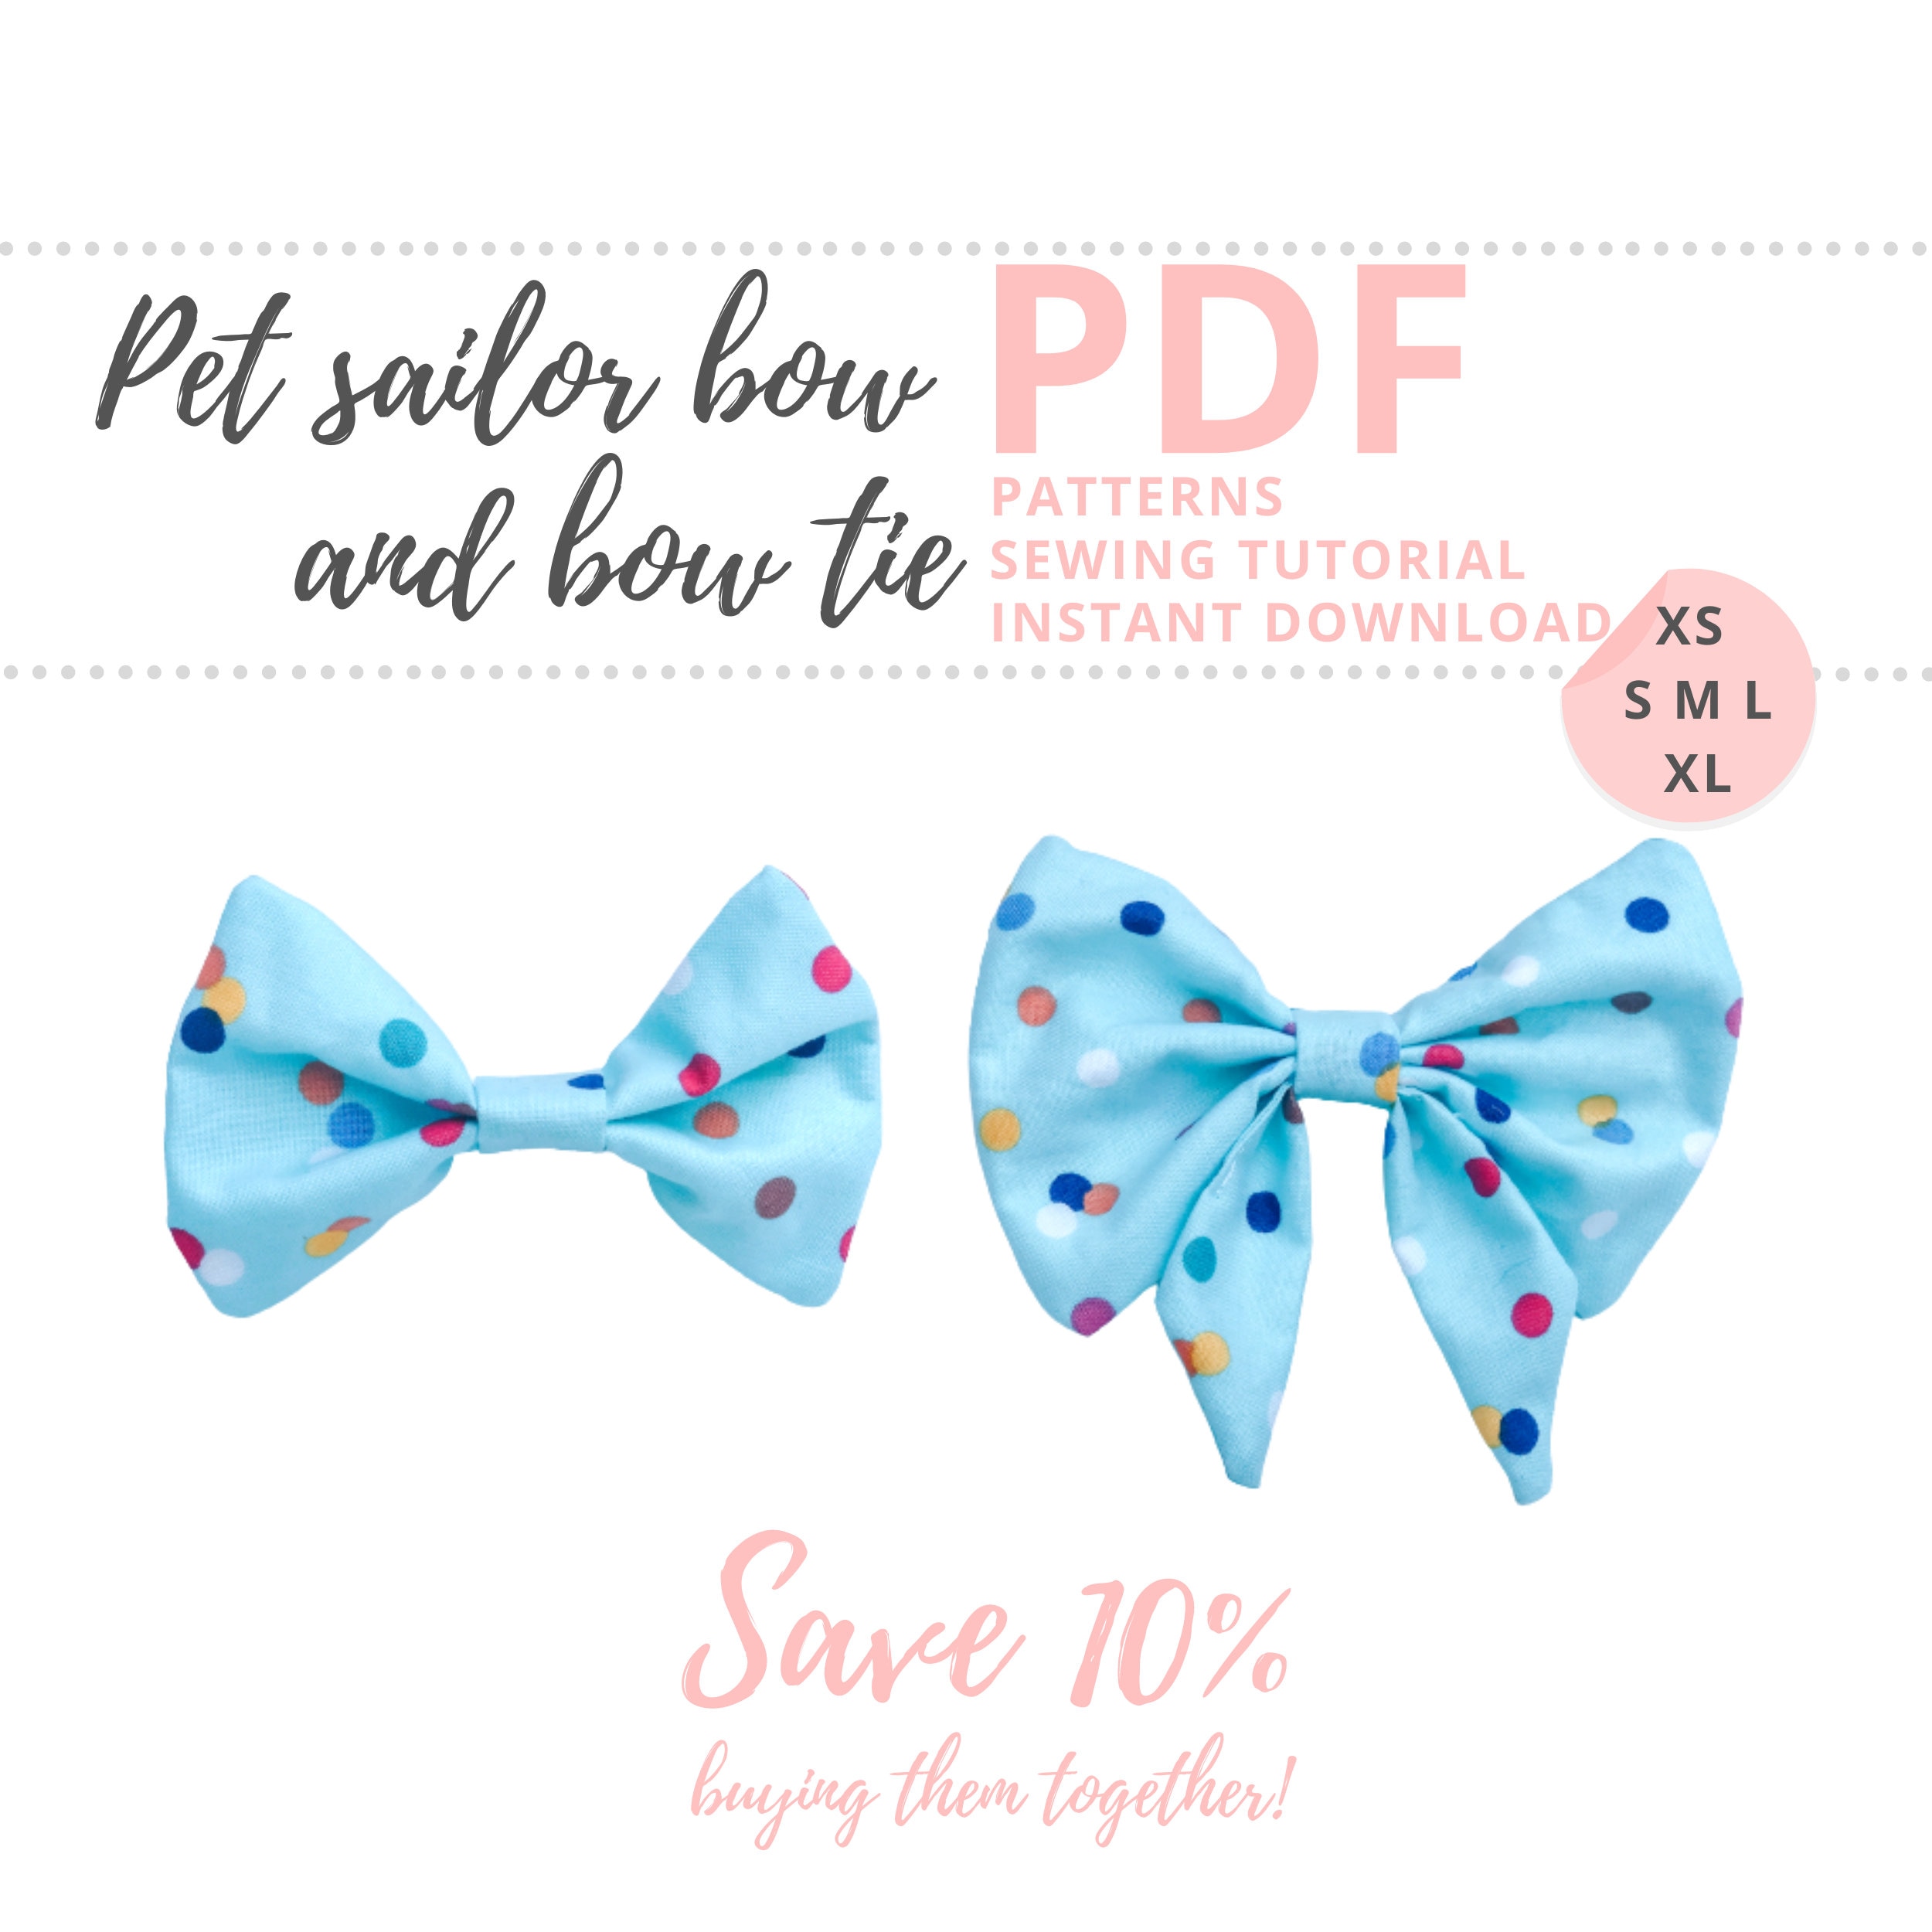 Dog Sailor Bow and Bow Tie PDF Patterns and Tutorials / 2 Bow Accessories  for Pets / 5 Sizes Sewing Patterns XS to XL Instant Download 